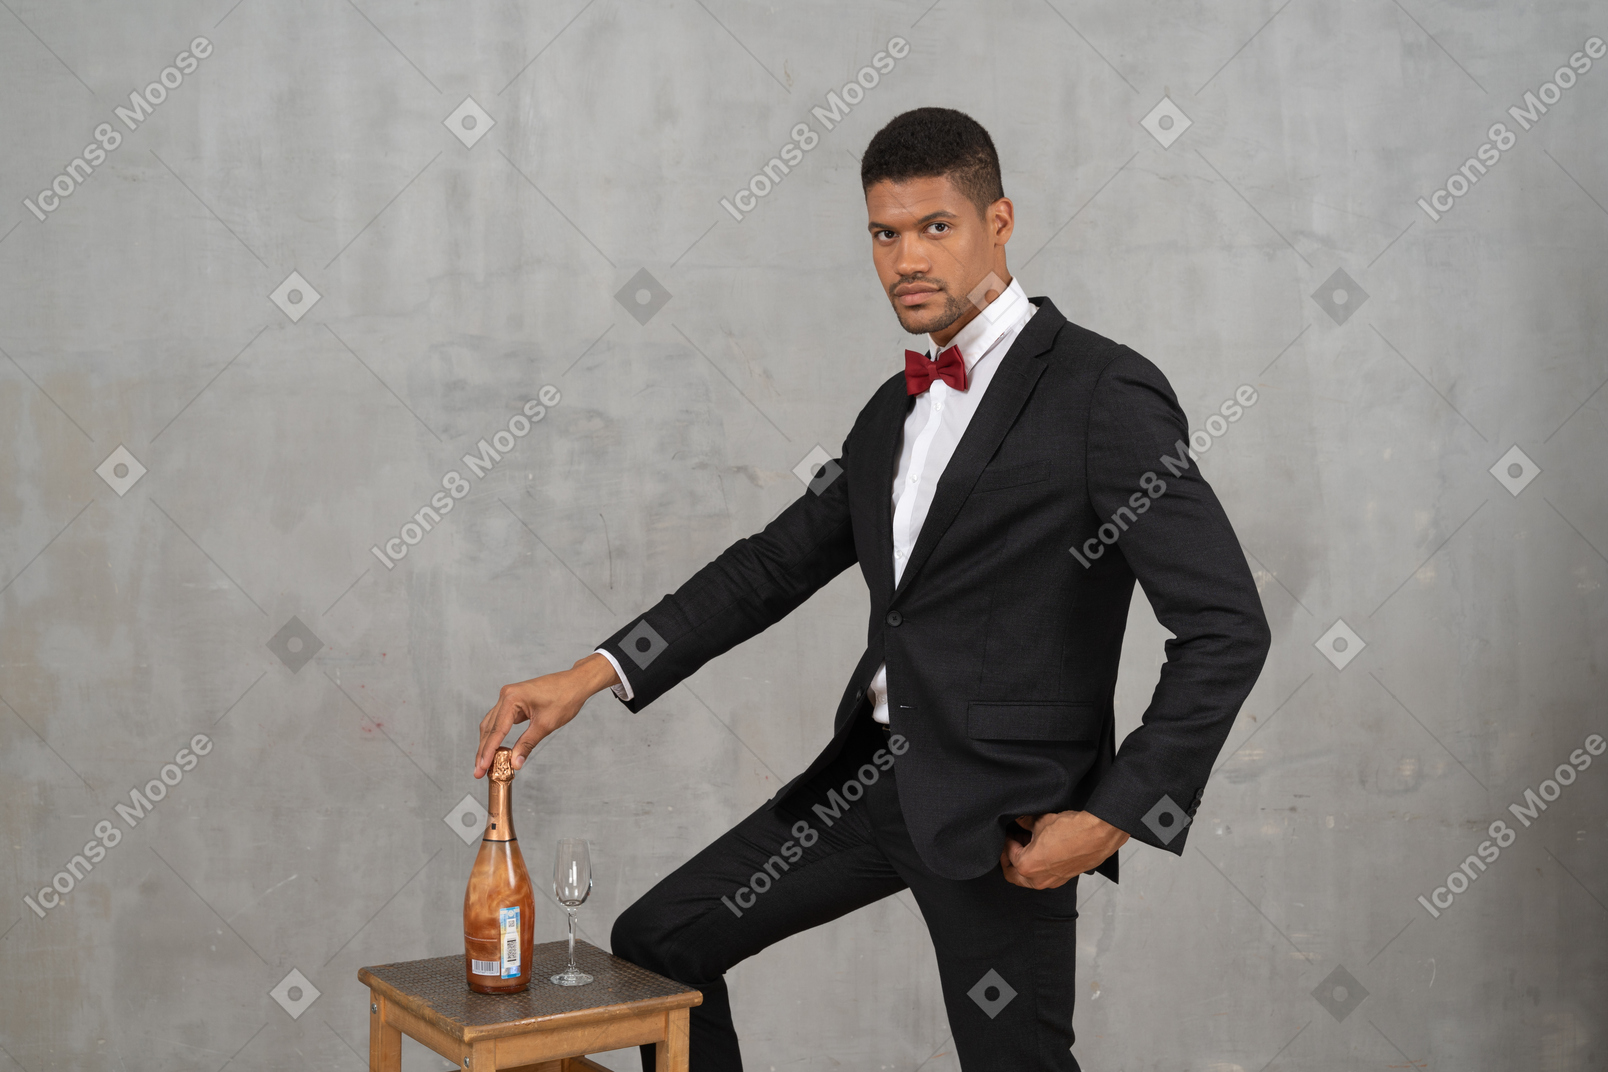 Man standing with hand on top of a champagne bottle